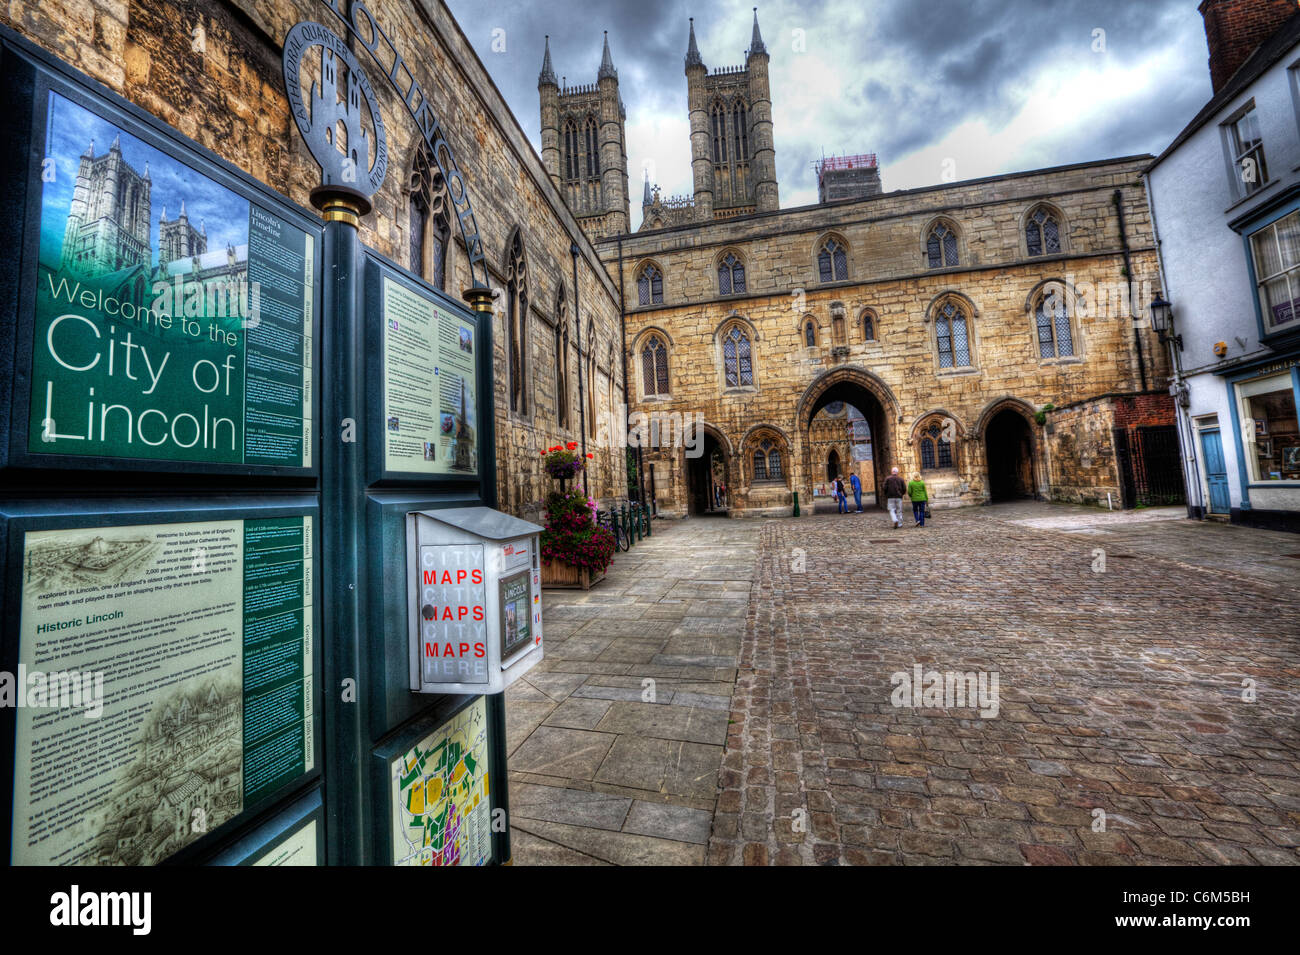 Lincoln city, Lincolnshire welcome to the city maps and sign cathedral castle square Stock Photo